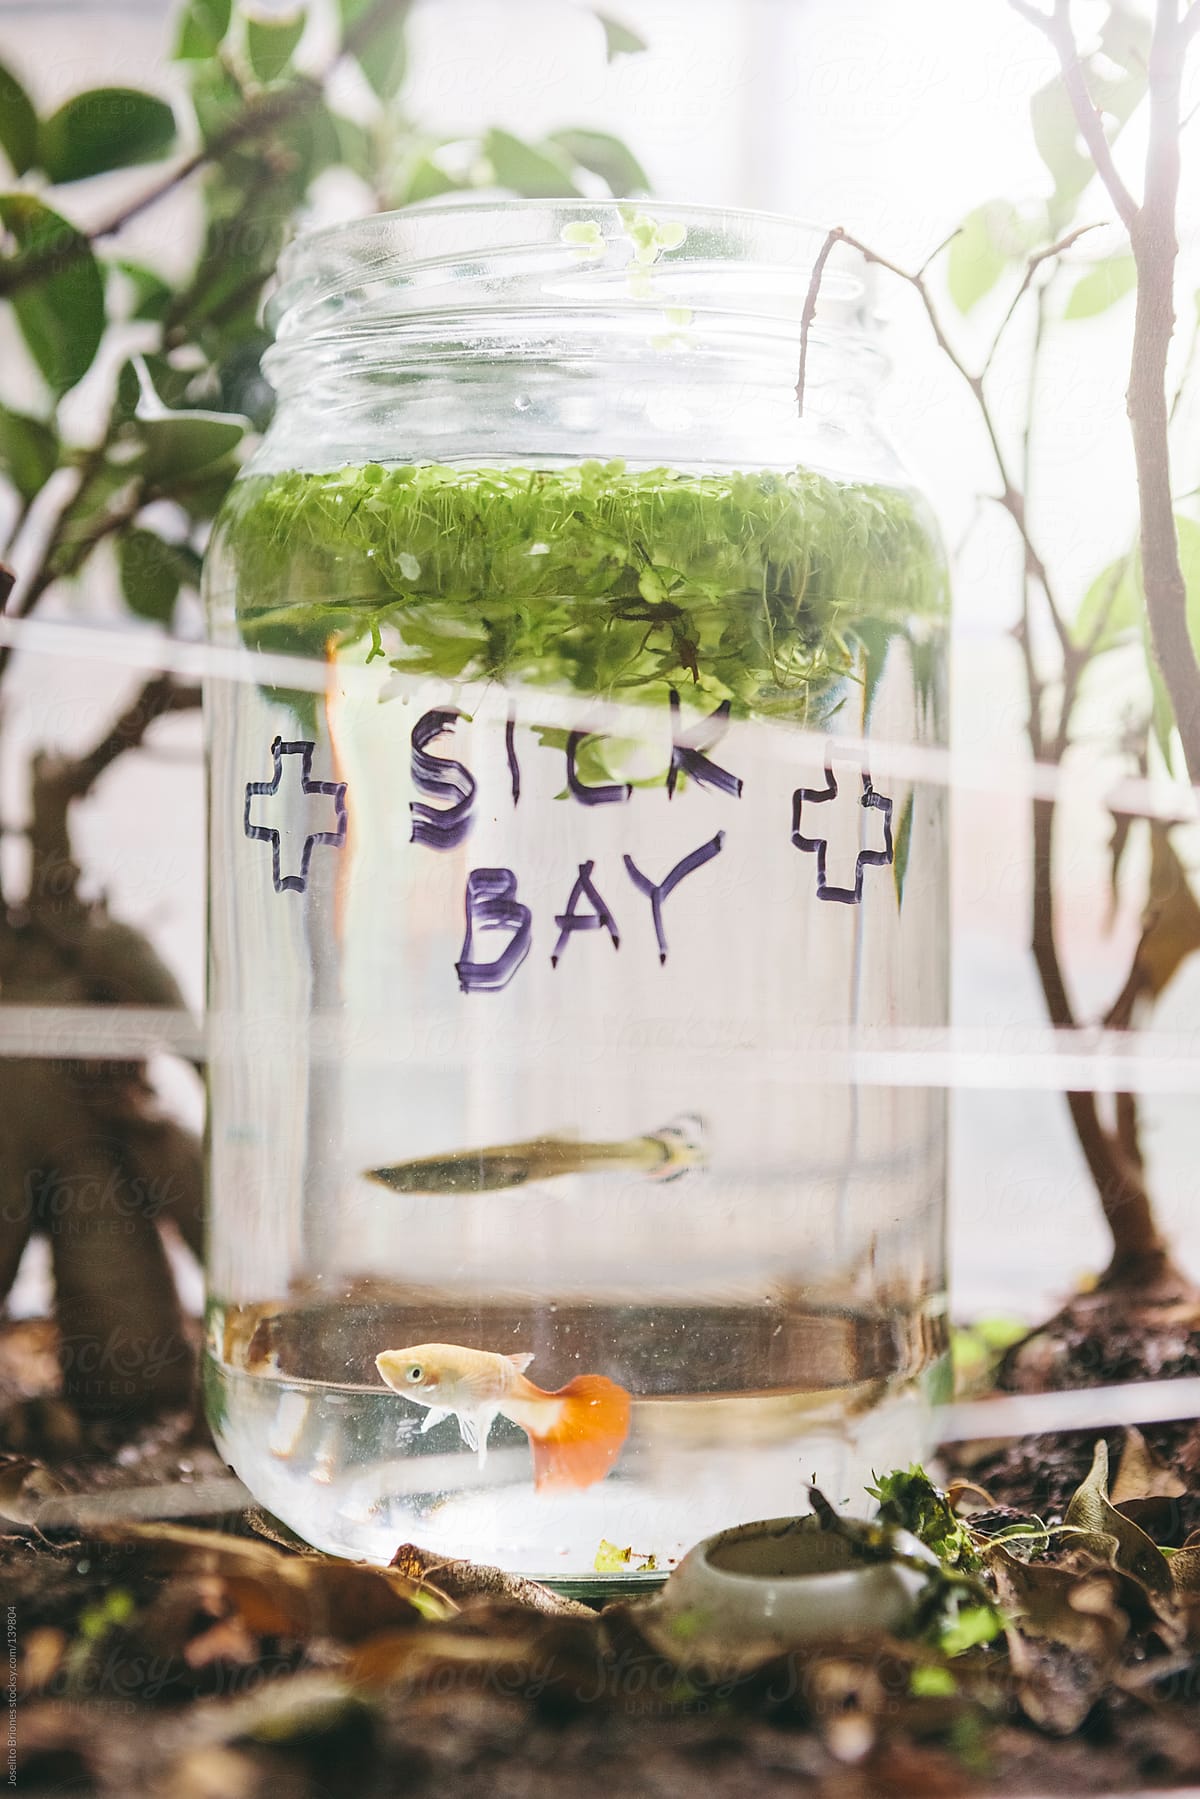 Sick Fancy Guppy and other Tropical Fish Isolated in Quarantine in Bottle with Duckweed by Window